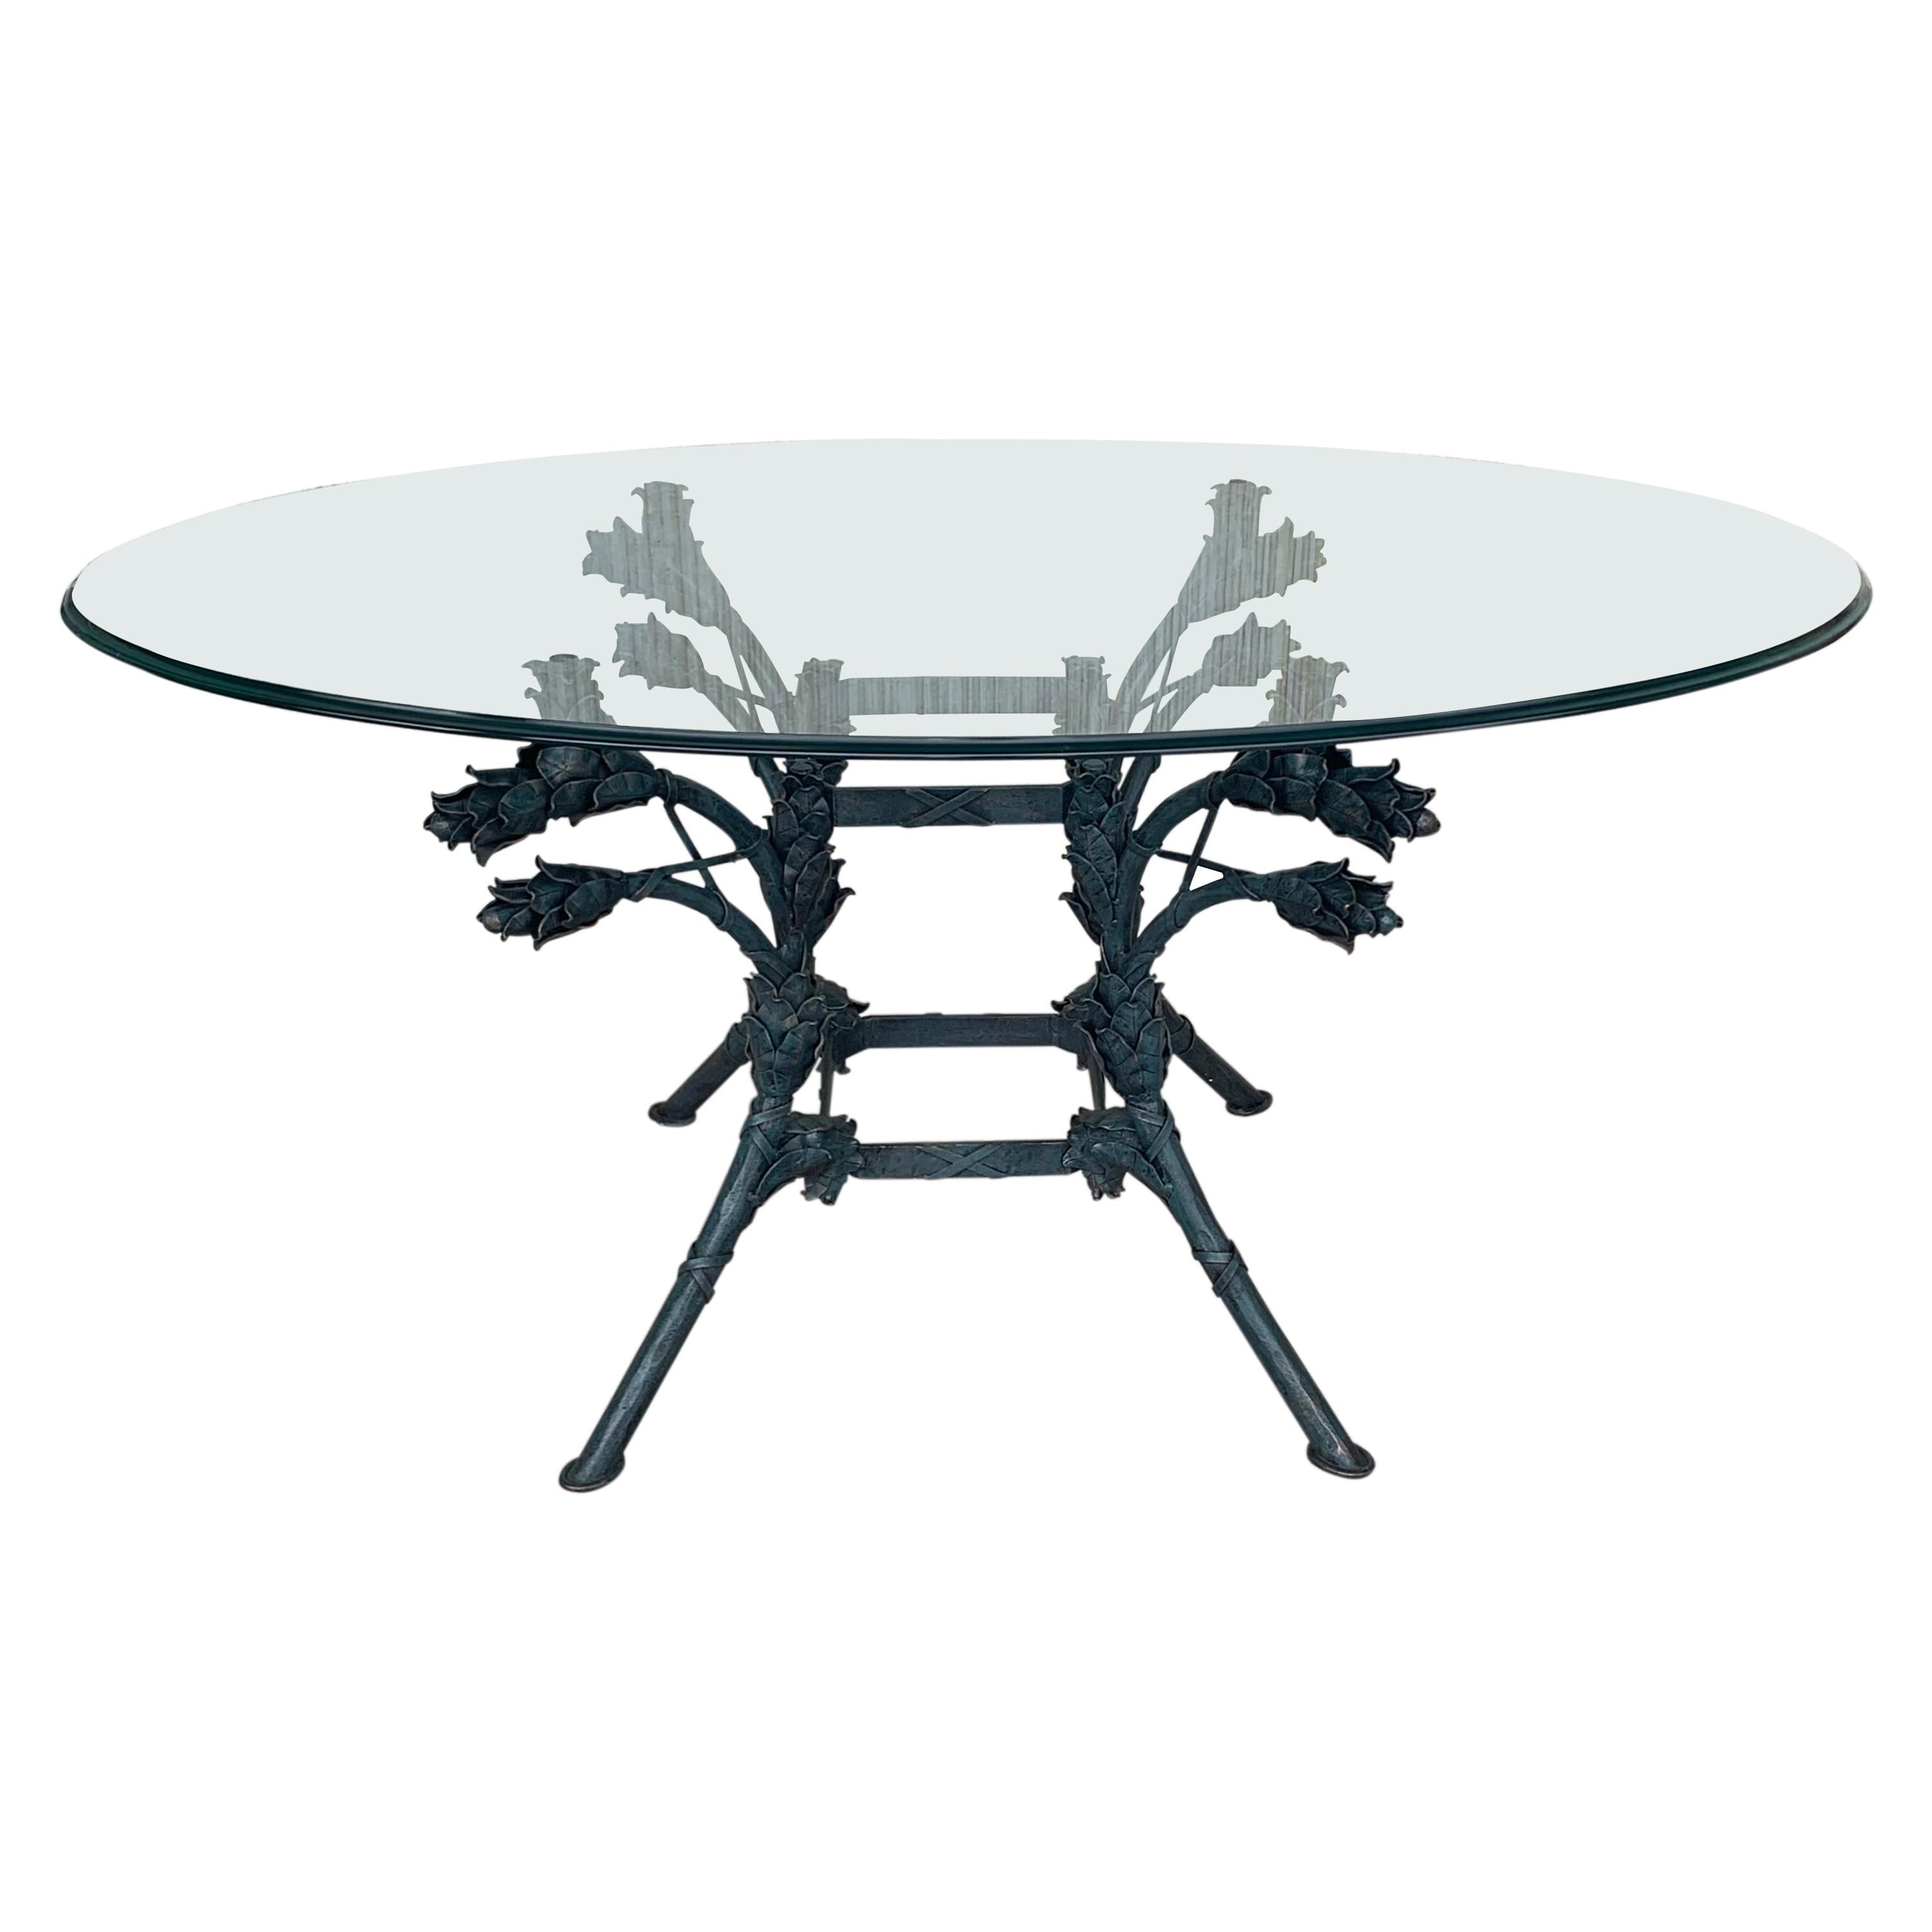 Italian Neoclassical Ornamental Wrought Iron Center Table with Oval Glass Top For Sale